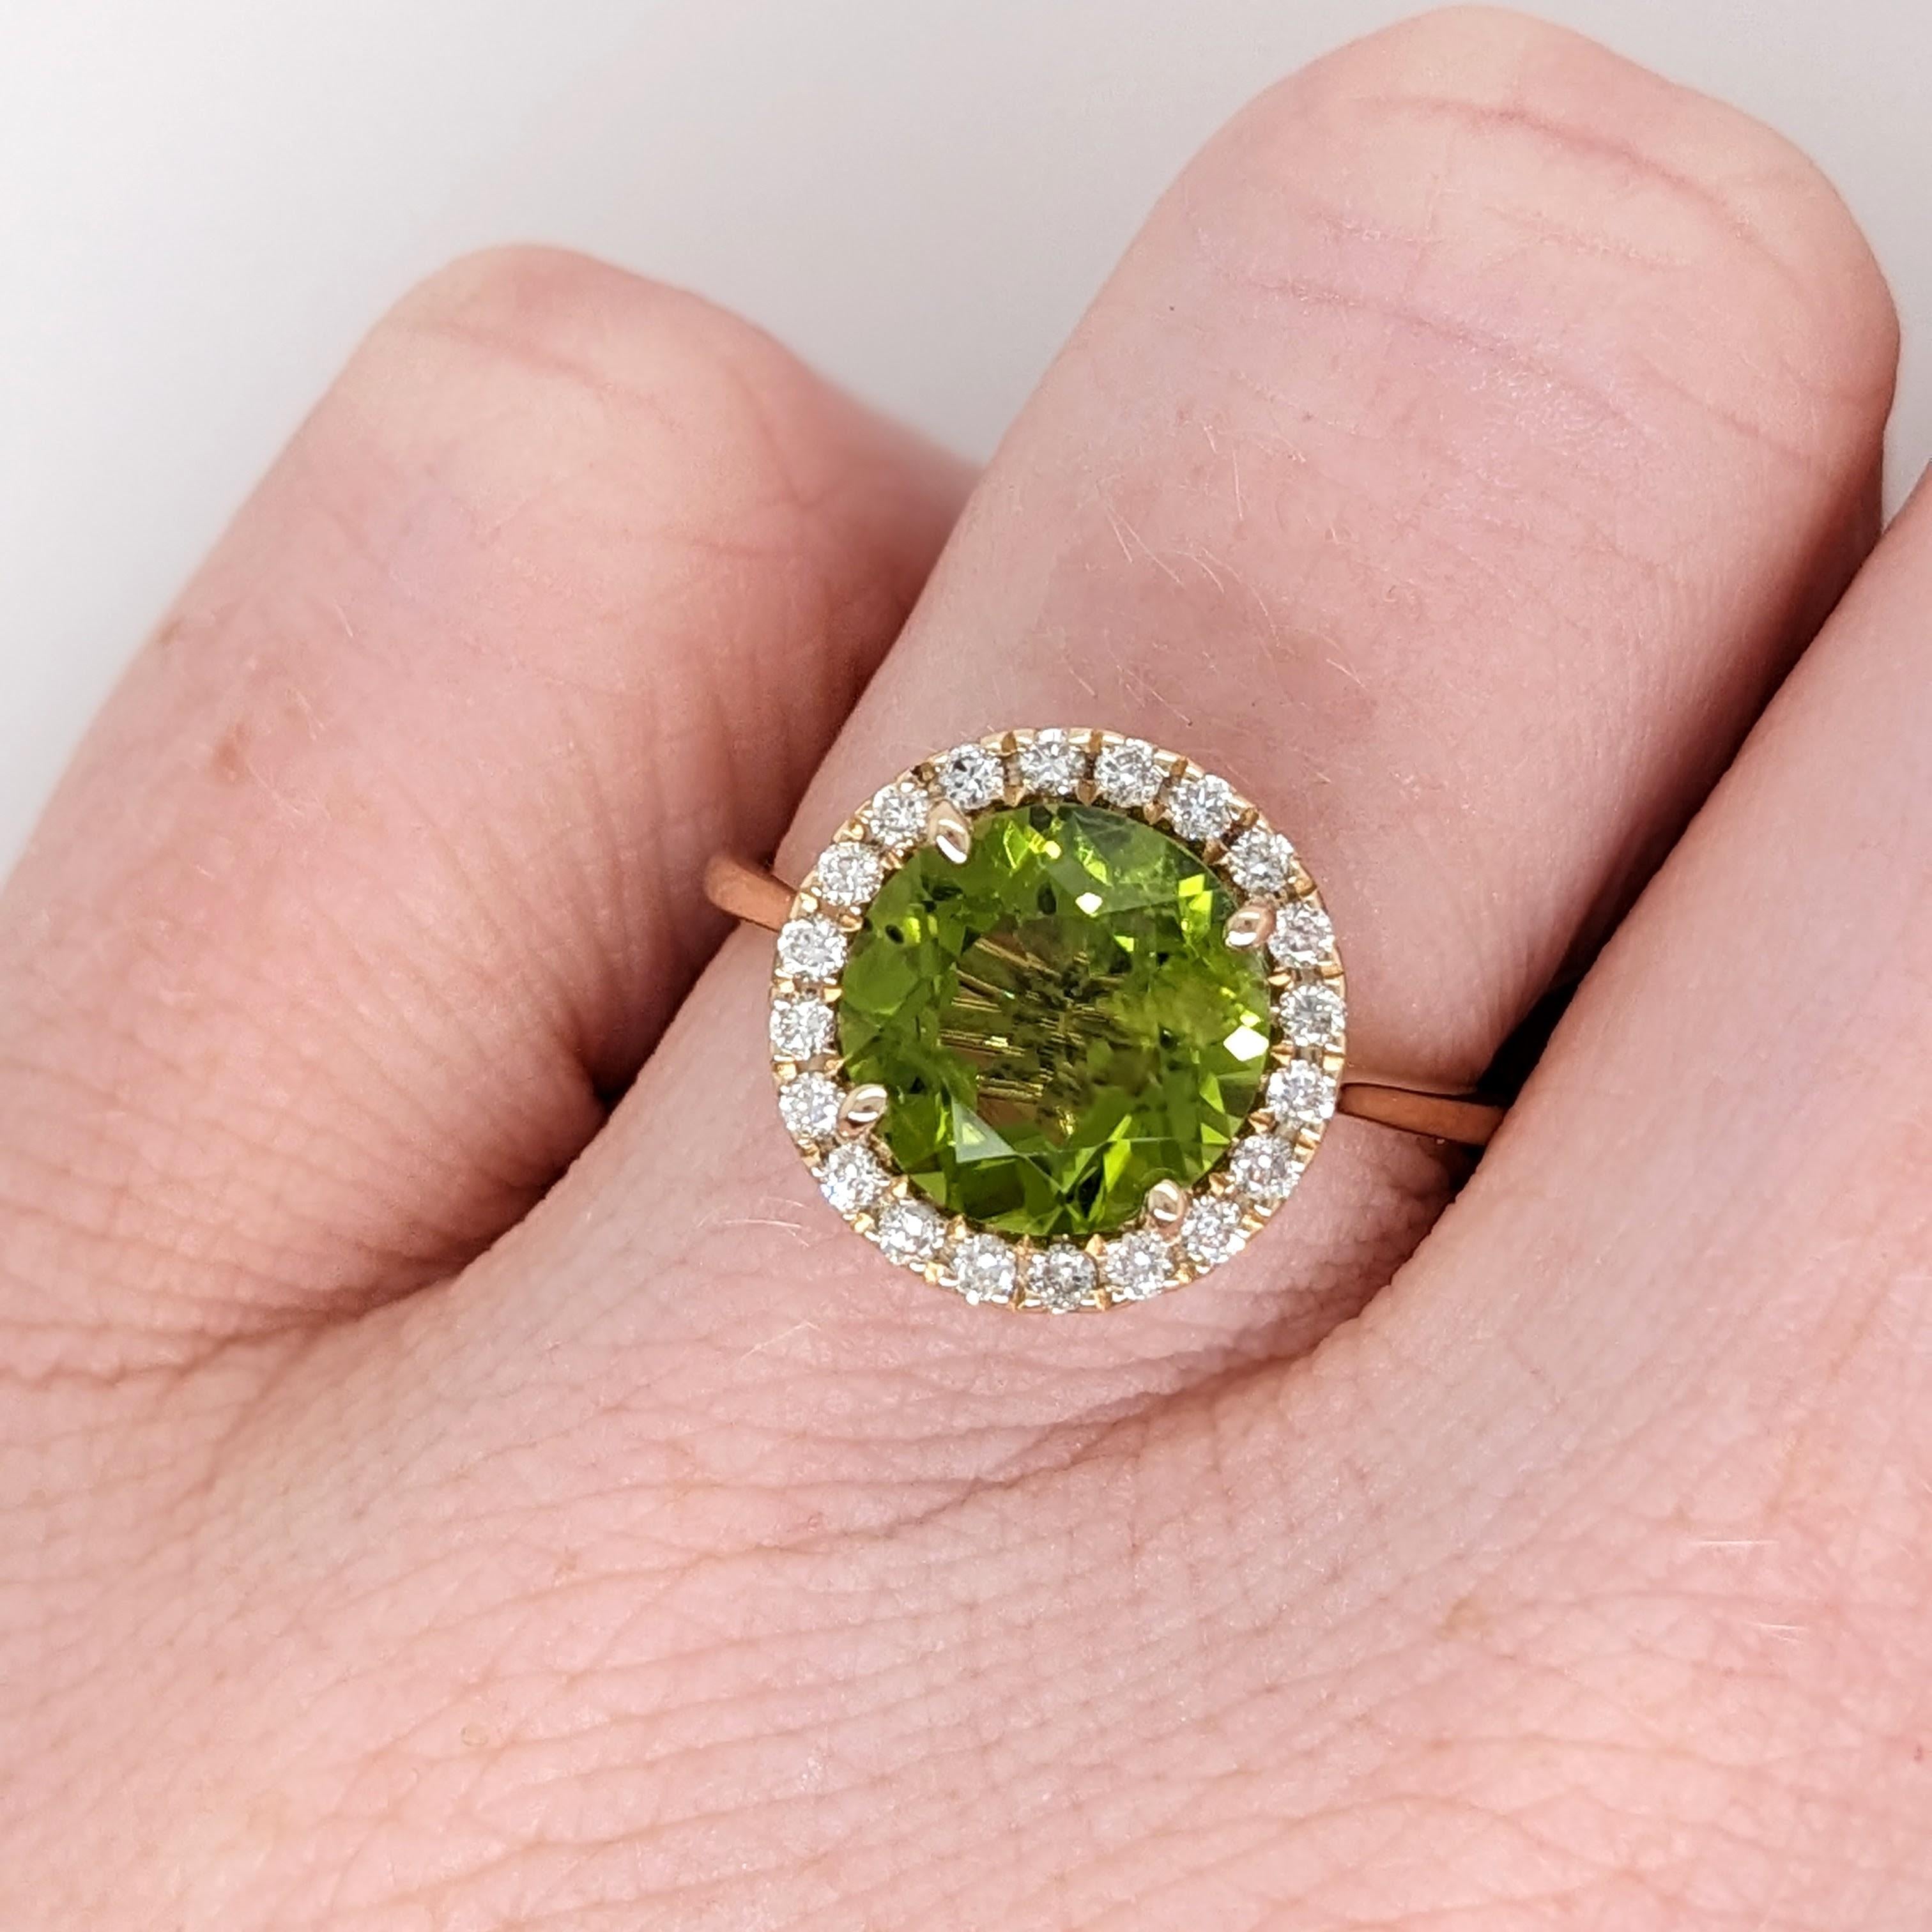 2.7ct Sparkling Peridot Ring w Natural Diamonds in Solid 14k Gold Round 9mm